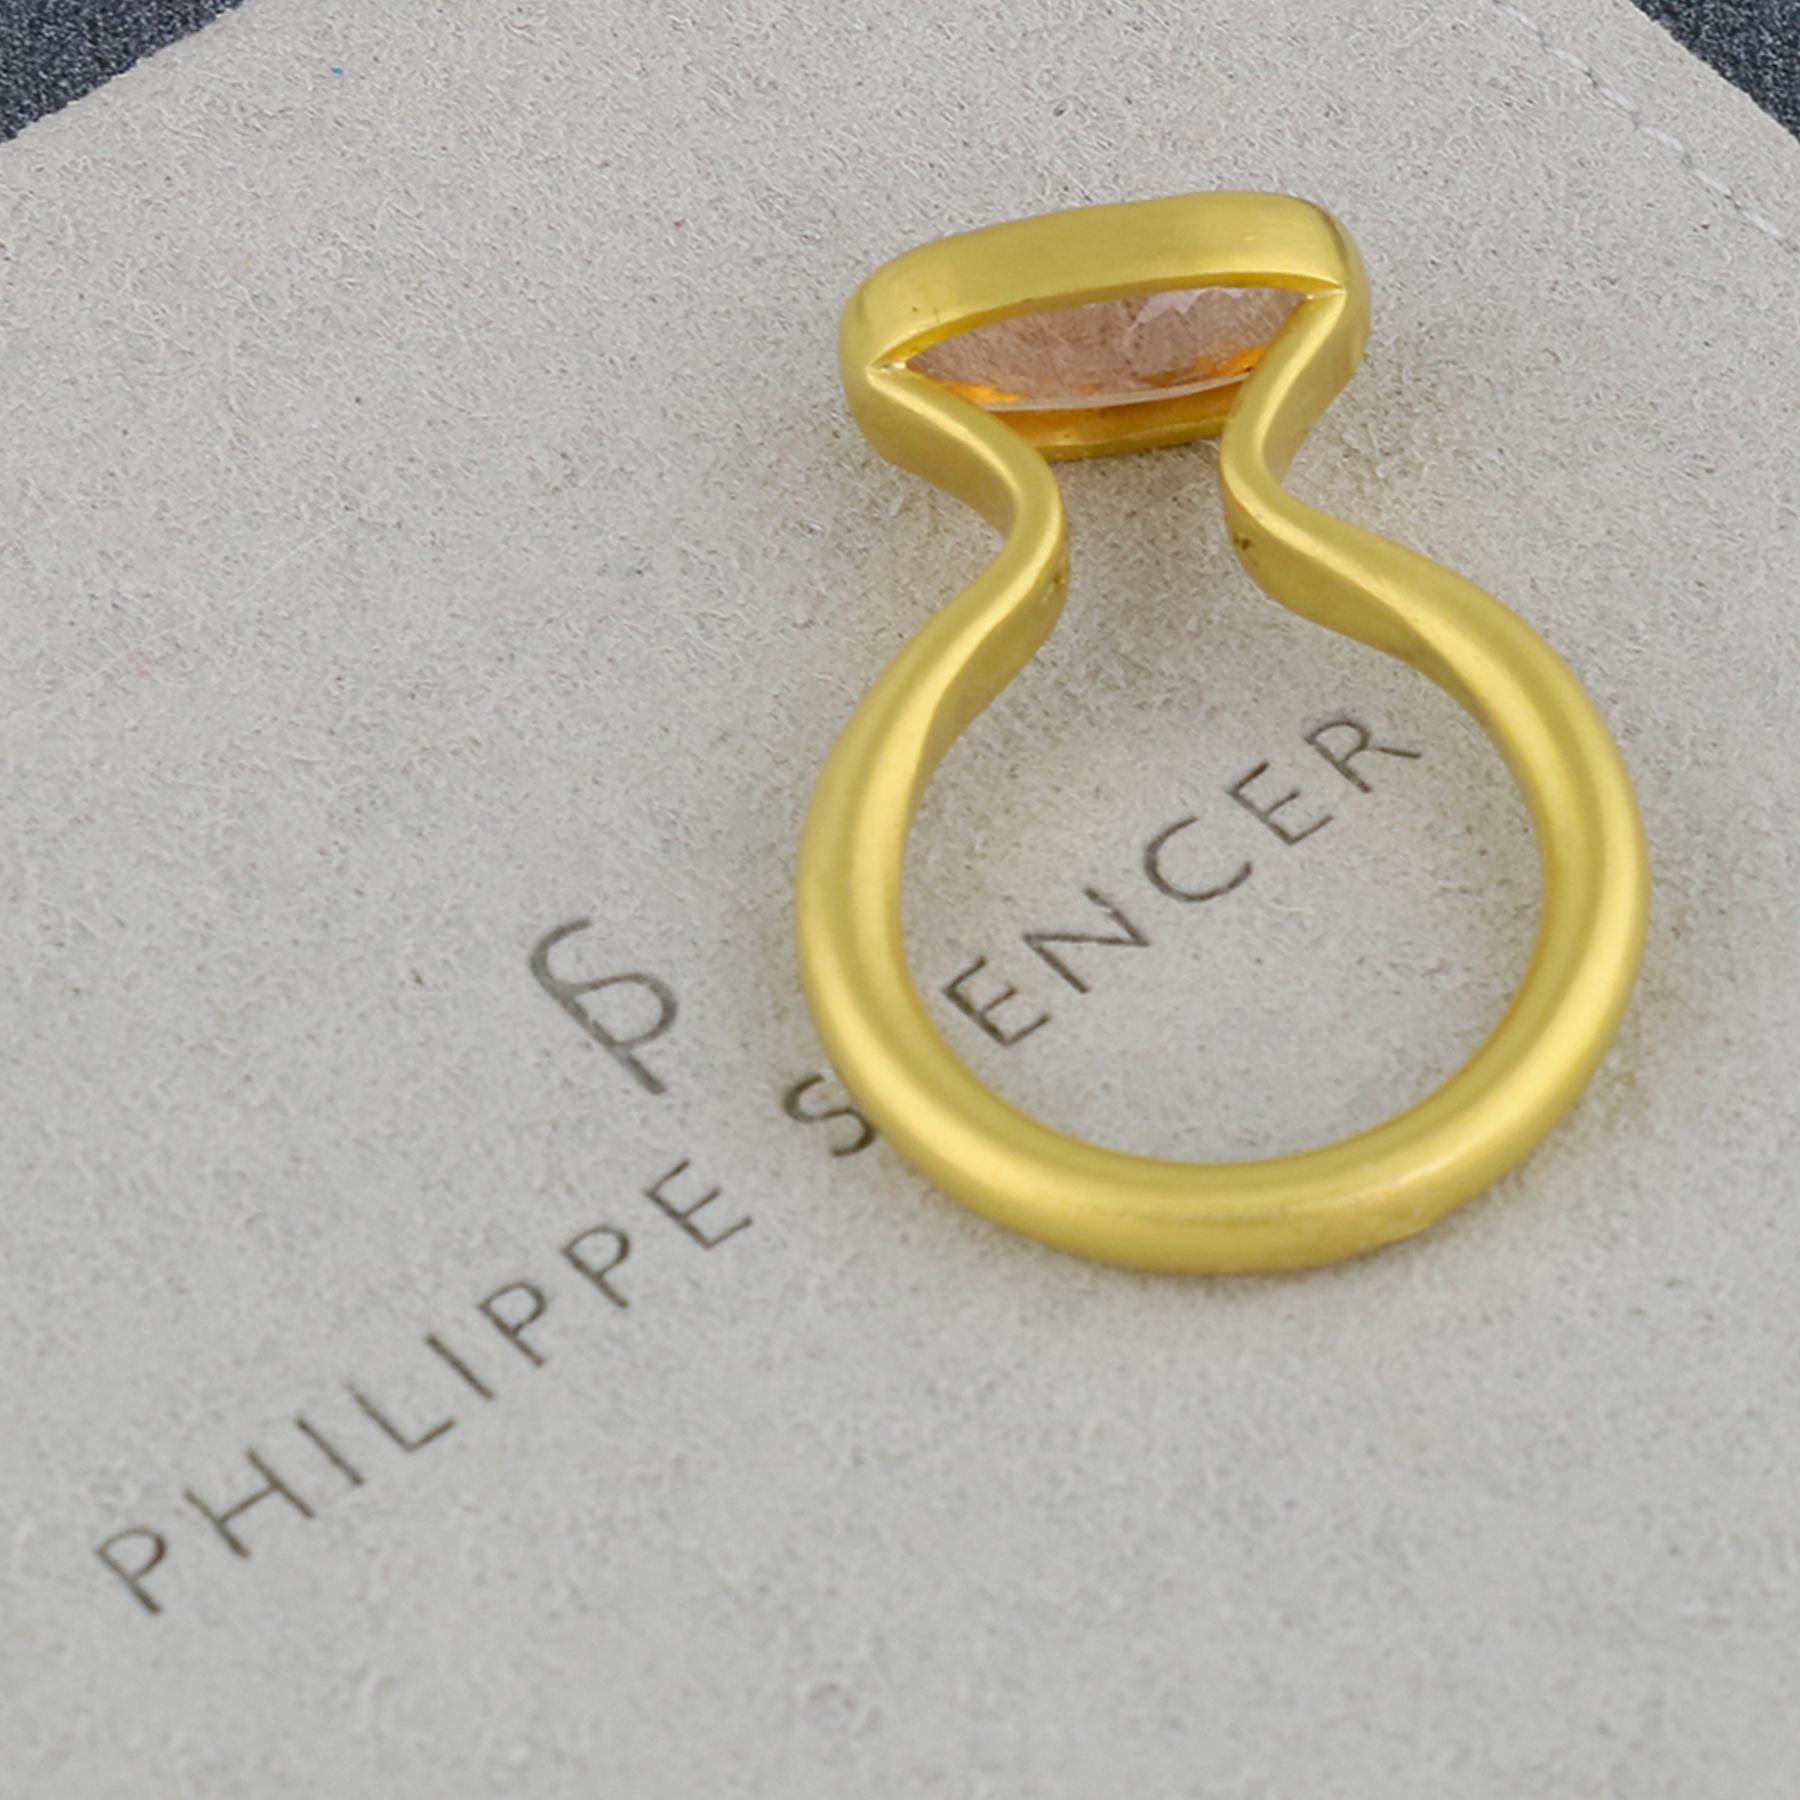 PHILIPPE SPENCER - Extremely Rare 4.2 Ct. Deep Coral-Color Imperial Topaz wrapped in backless 22K Gold with Solid 20K Hand & Anvil Forged Round Statement Ring. Heavy Brushed Finish. Size 7 1/2 to 7. 3/4, and is in-stock and ready to ship. Our